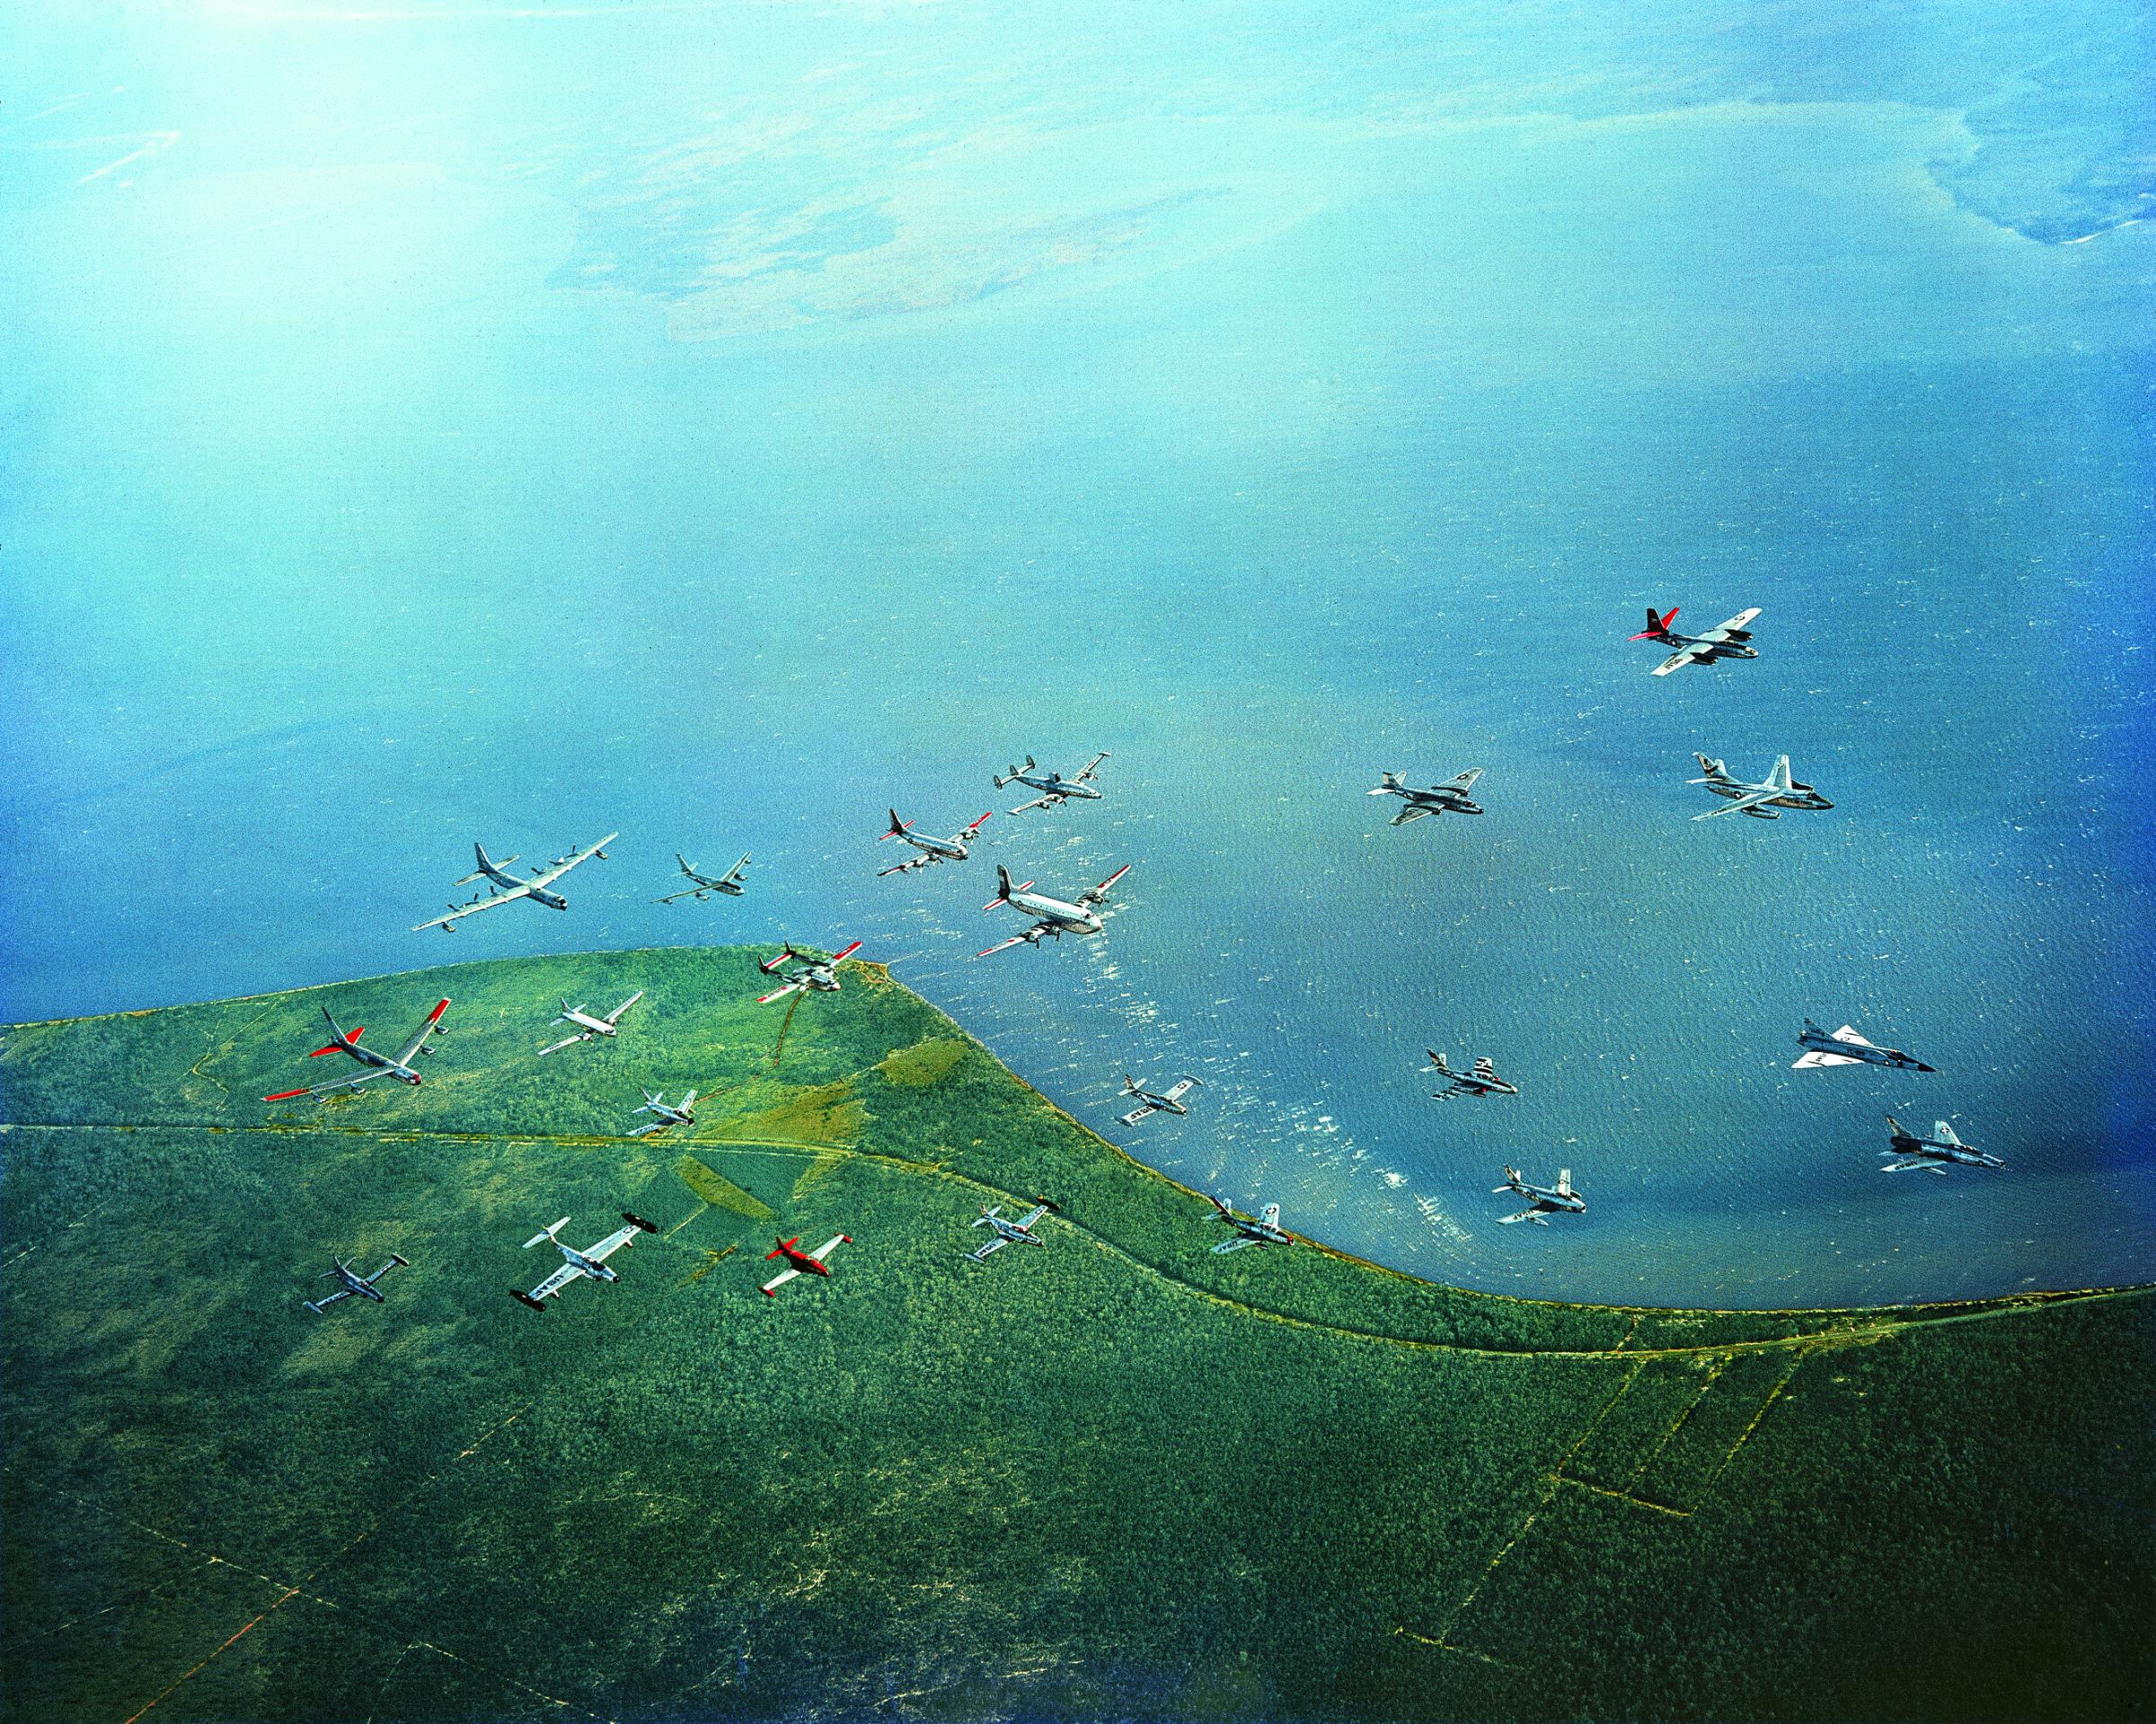 Nearly all of the U.S. Air Force's operational aircraft in a single formation, Florida, 1956.